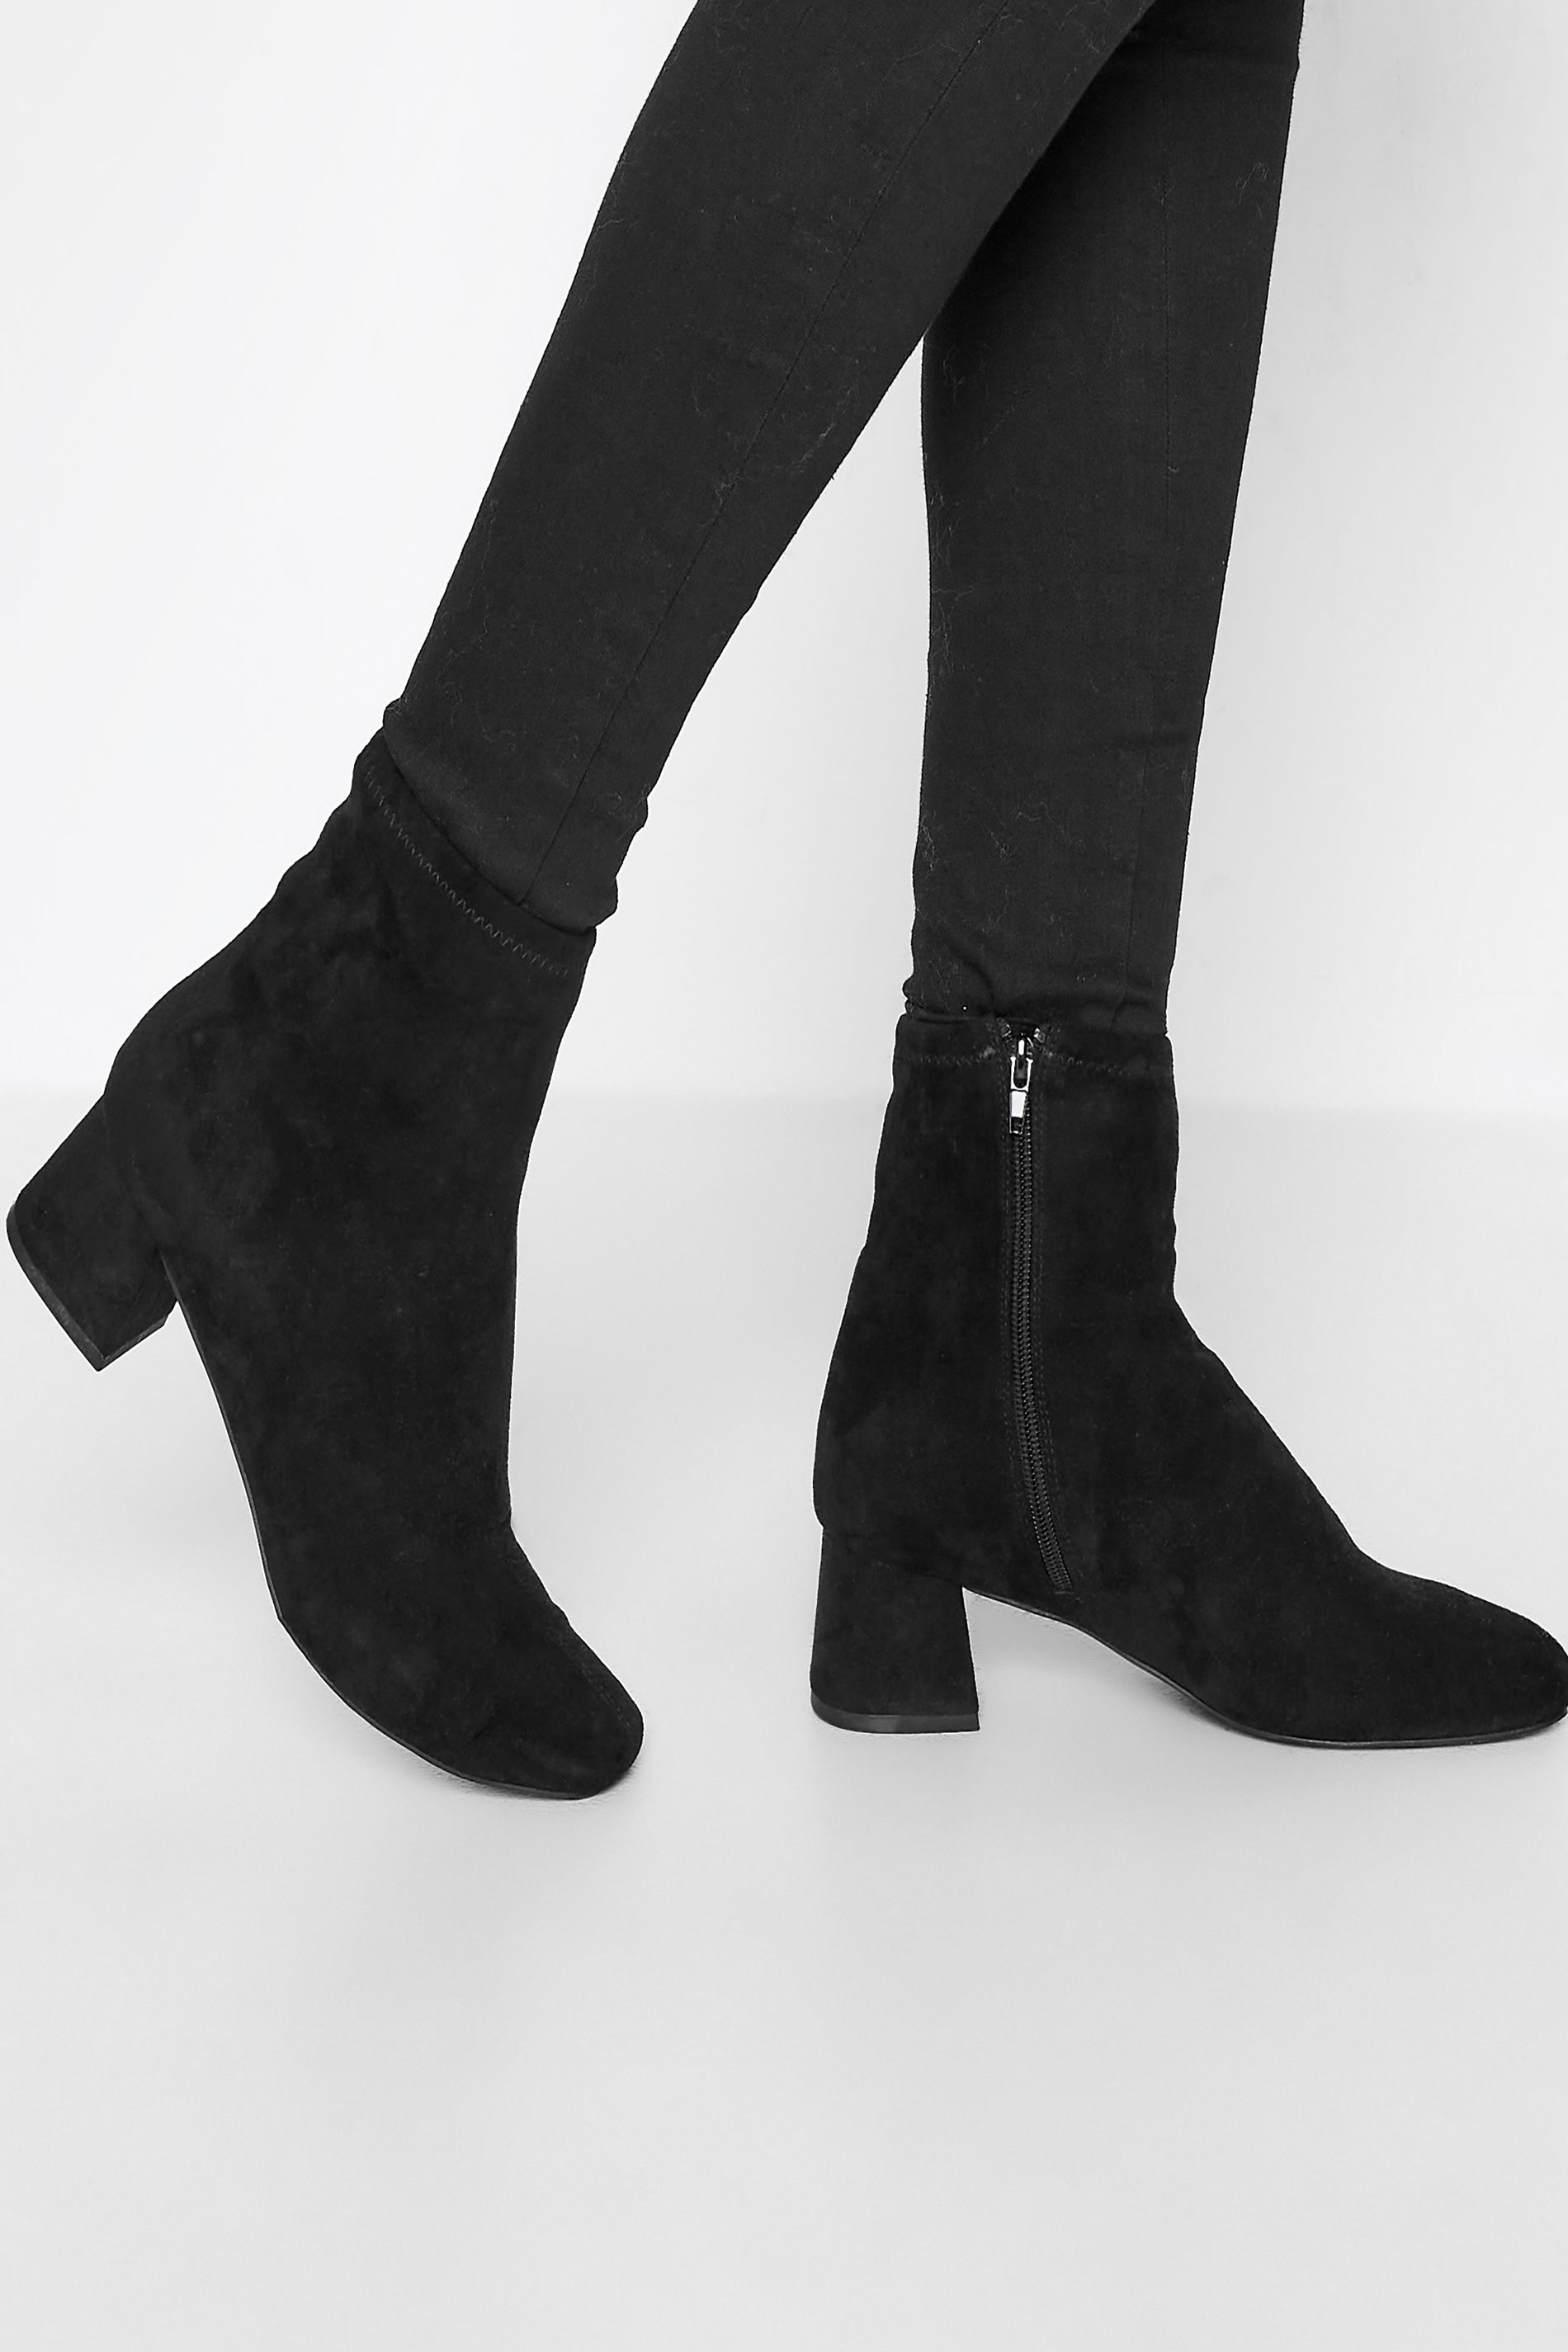 LTS Black Suede Block Heel Boots In Standard Fit | Long Tall Sally 1